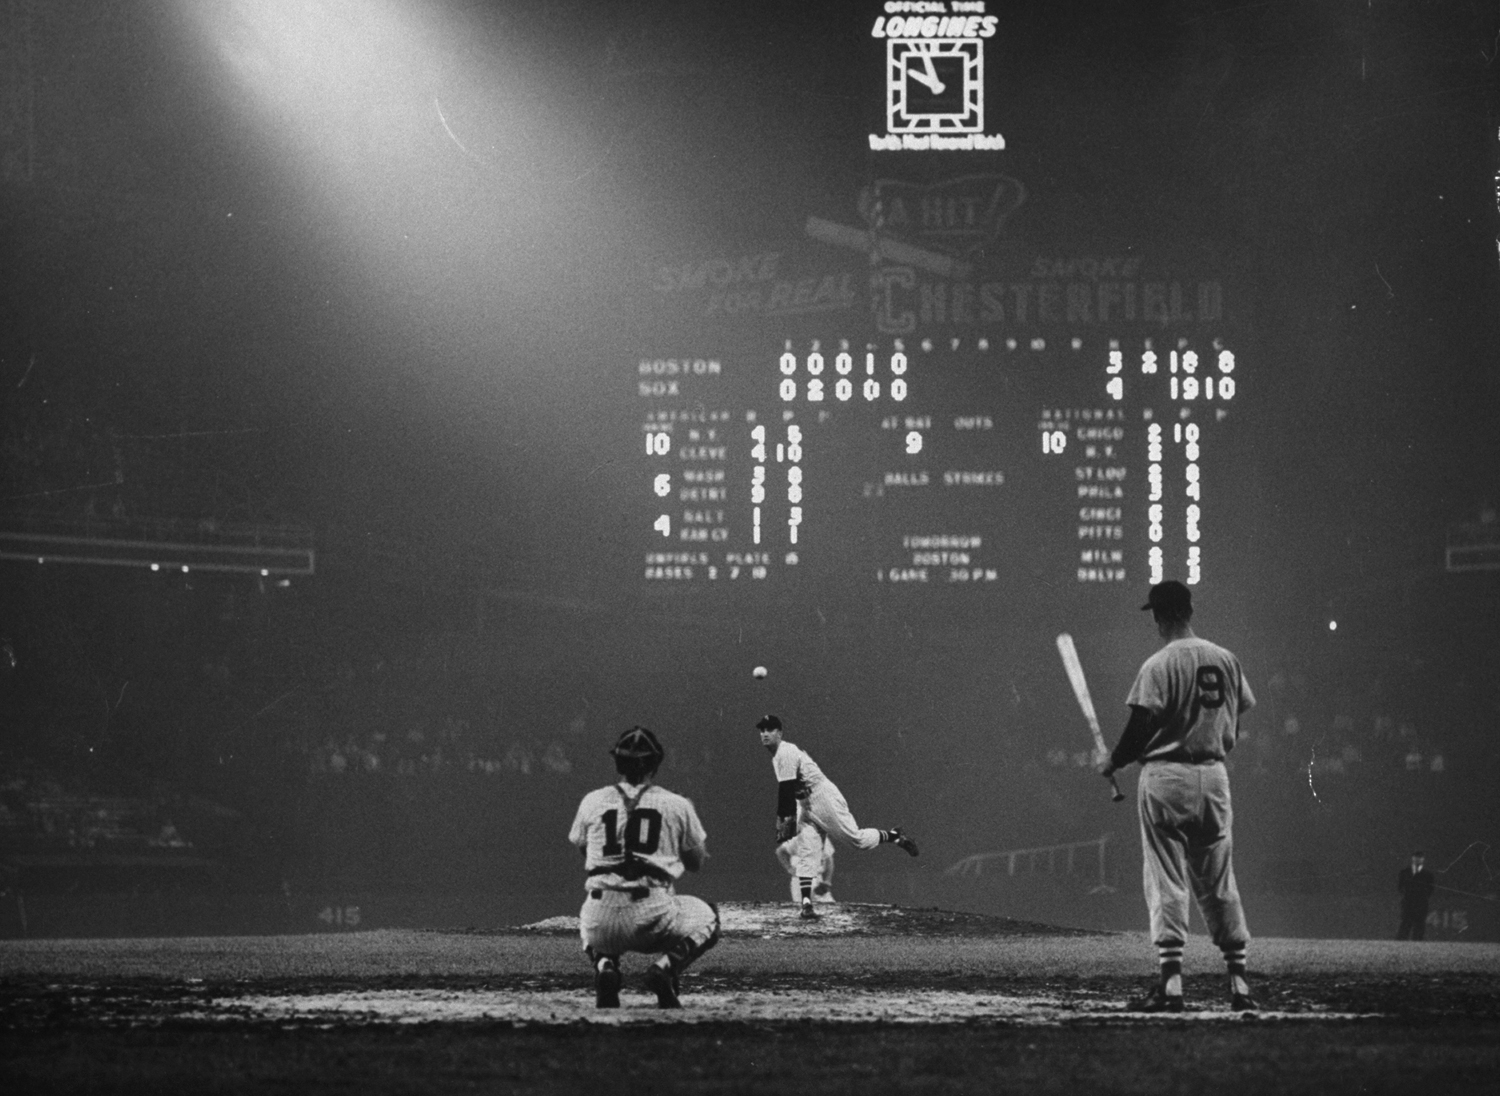 Ted Williams waits while pitcher warms up at Comiskey Park, 1957.